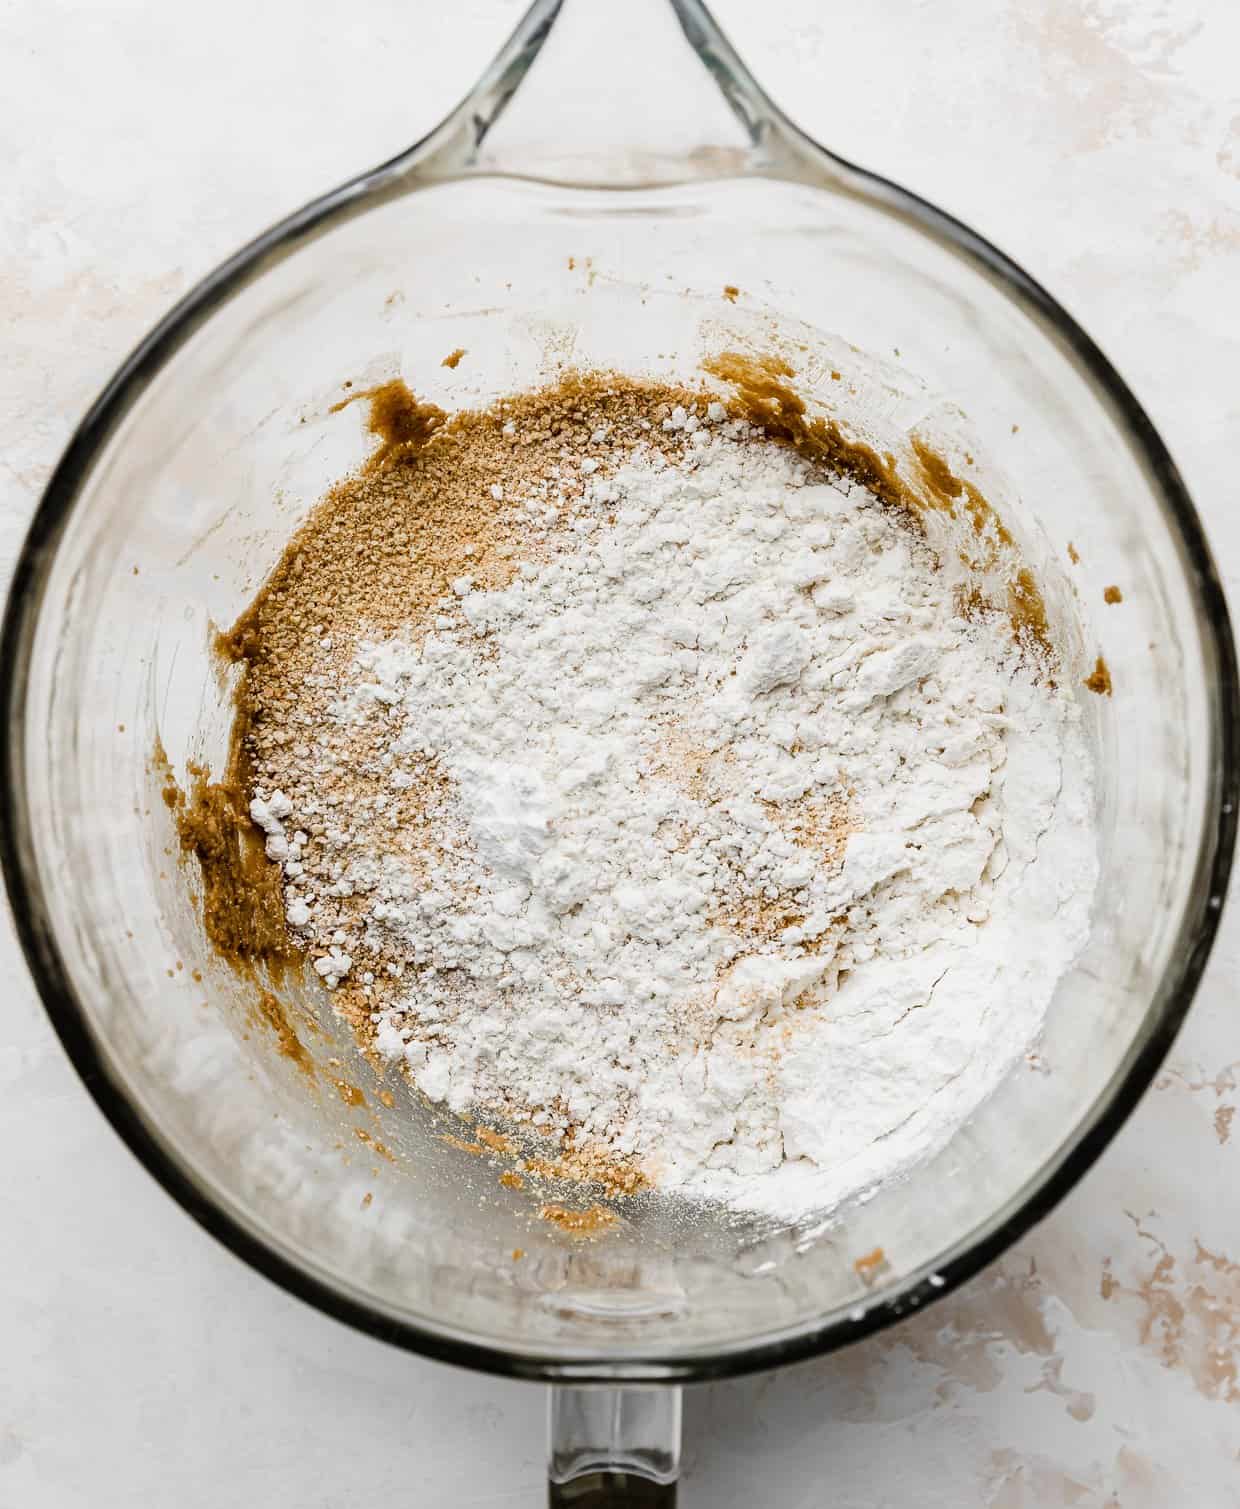 Graham cracker crumbs and flour in a glass mixing bowl.